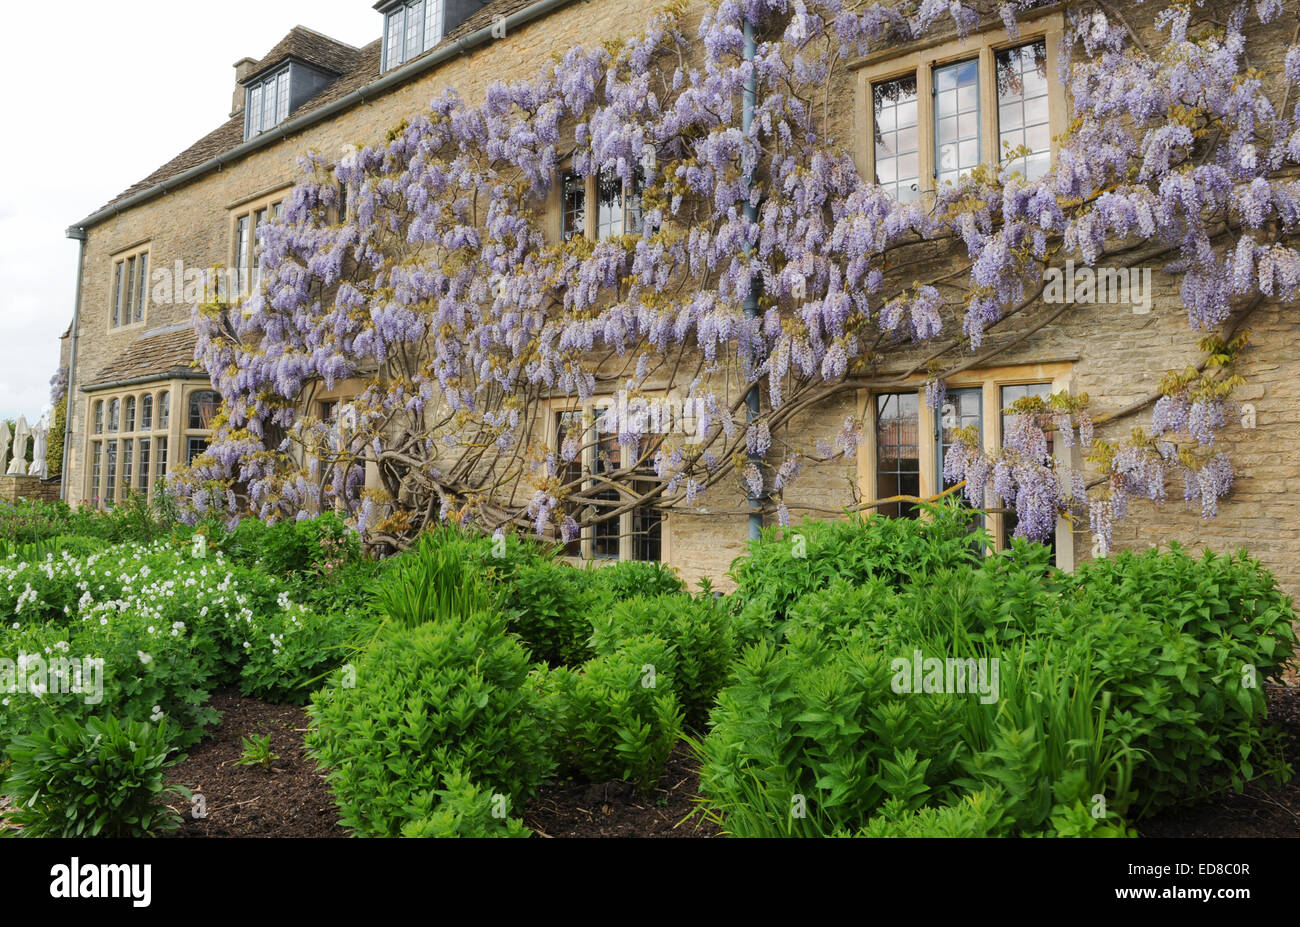 Flowering Wisteria on Whatley Manor in the Cotswolds near Malmesbury, Wiltshire, England, UK Stock Photo